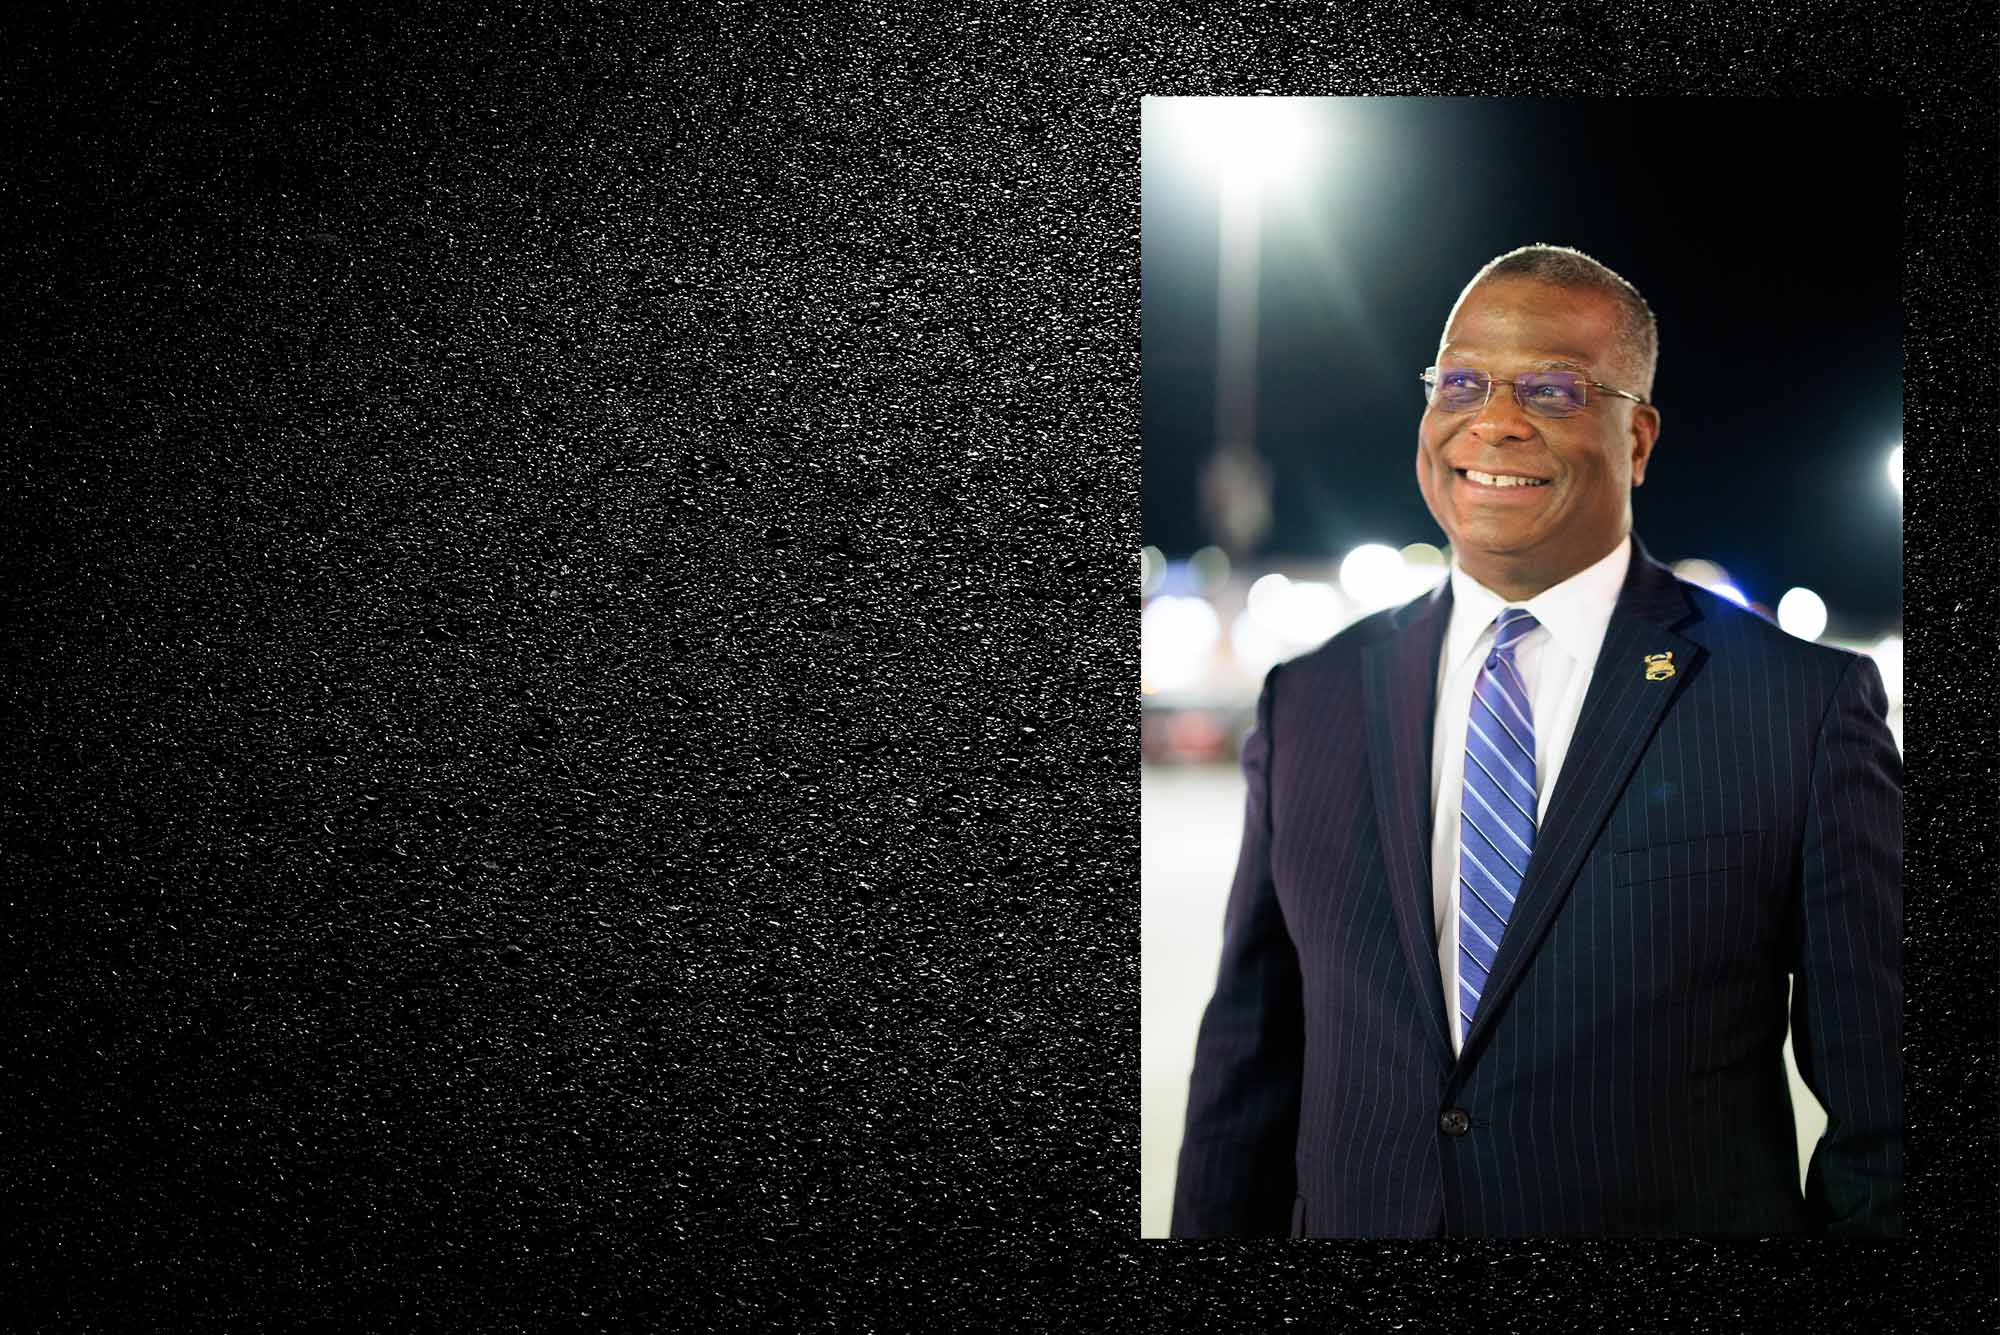 Image: Black background with many tiny white dots that imply a starry night sky. A photo of Boston Commissioner Michael Cox is shown on the right. Photo: Boston police commissioner Michael. A Black man wearing glasses, a navy blye suit and blue striped tie, smiles as he looks to the distant left. the right side of his blazer has a gold pin and he stands in front of a blurry city background.